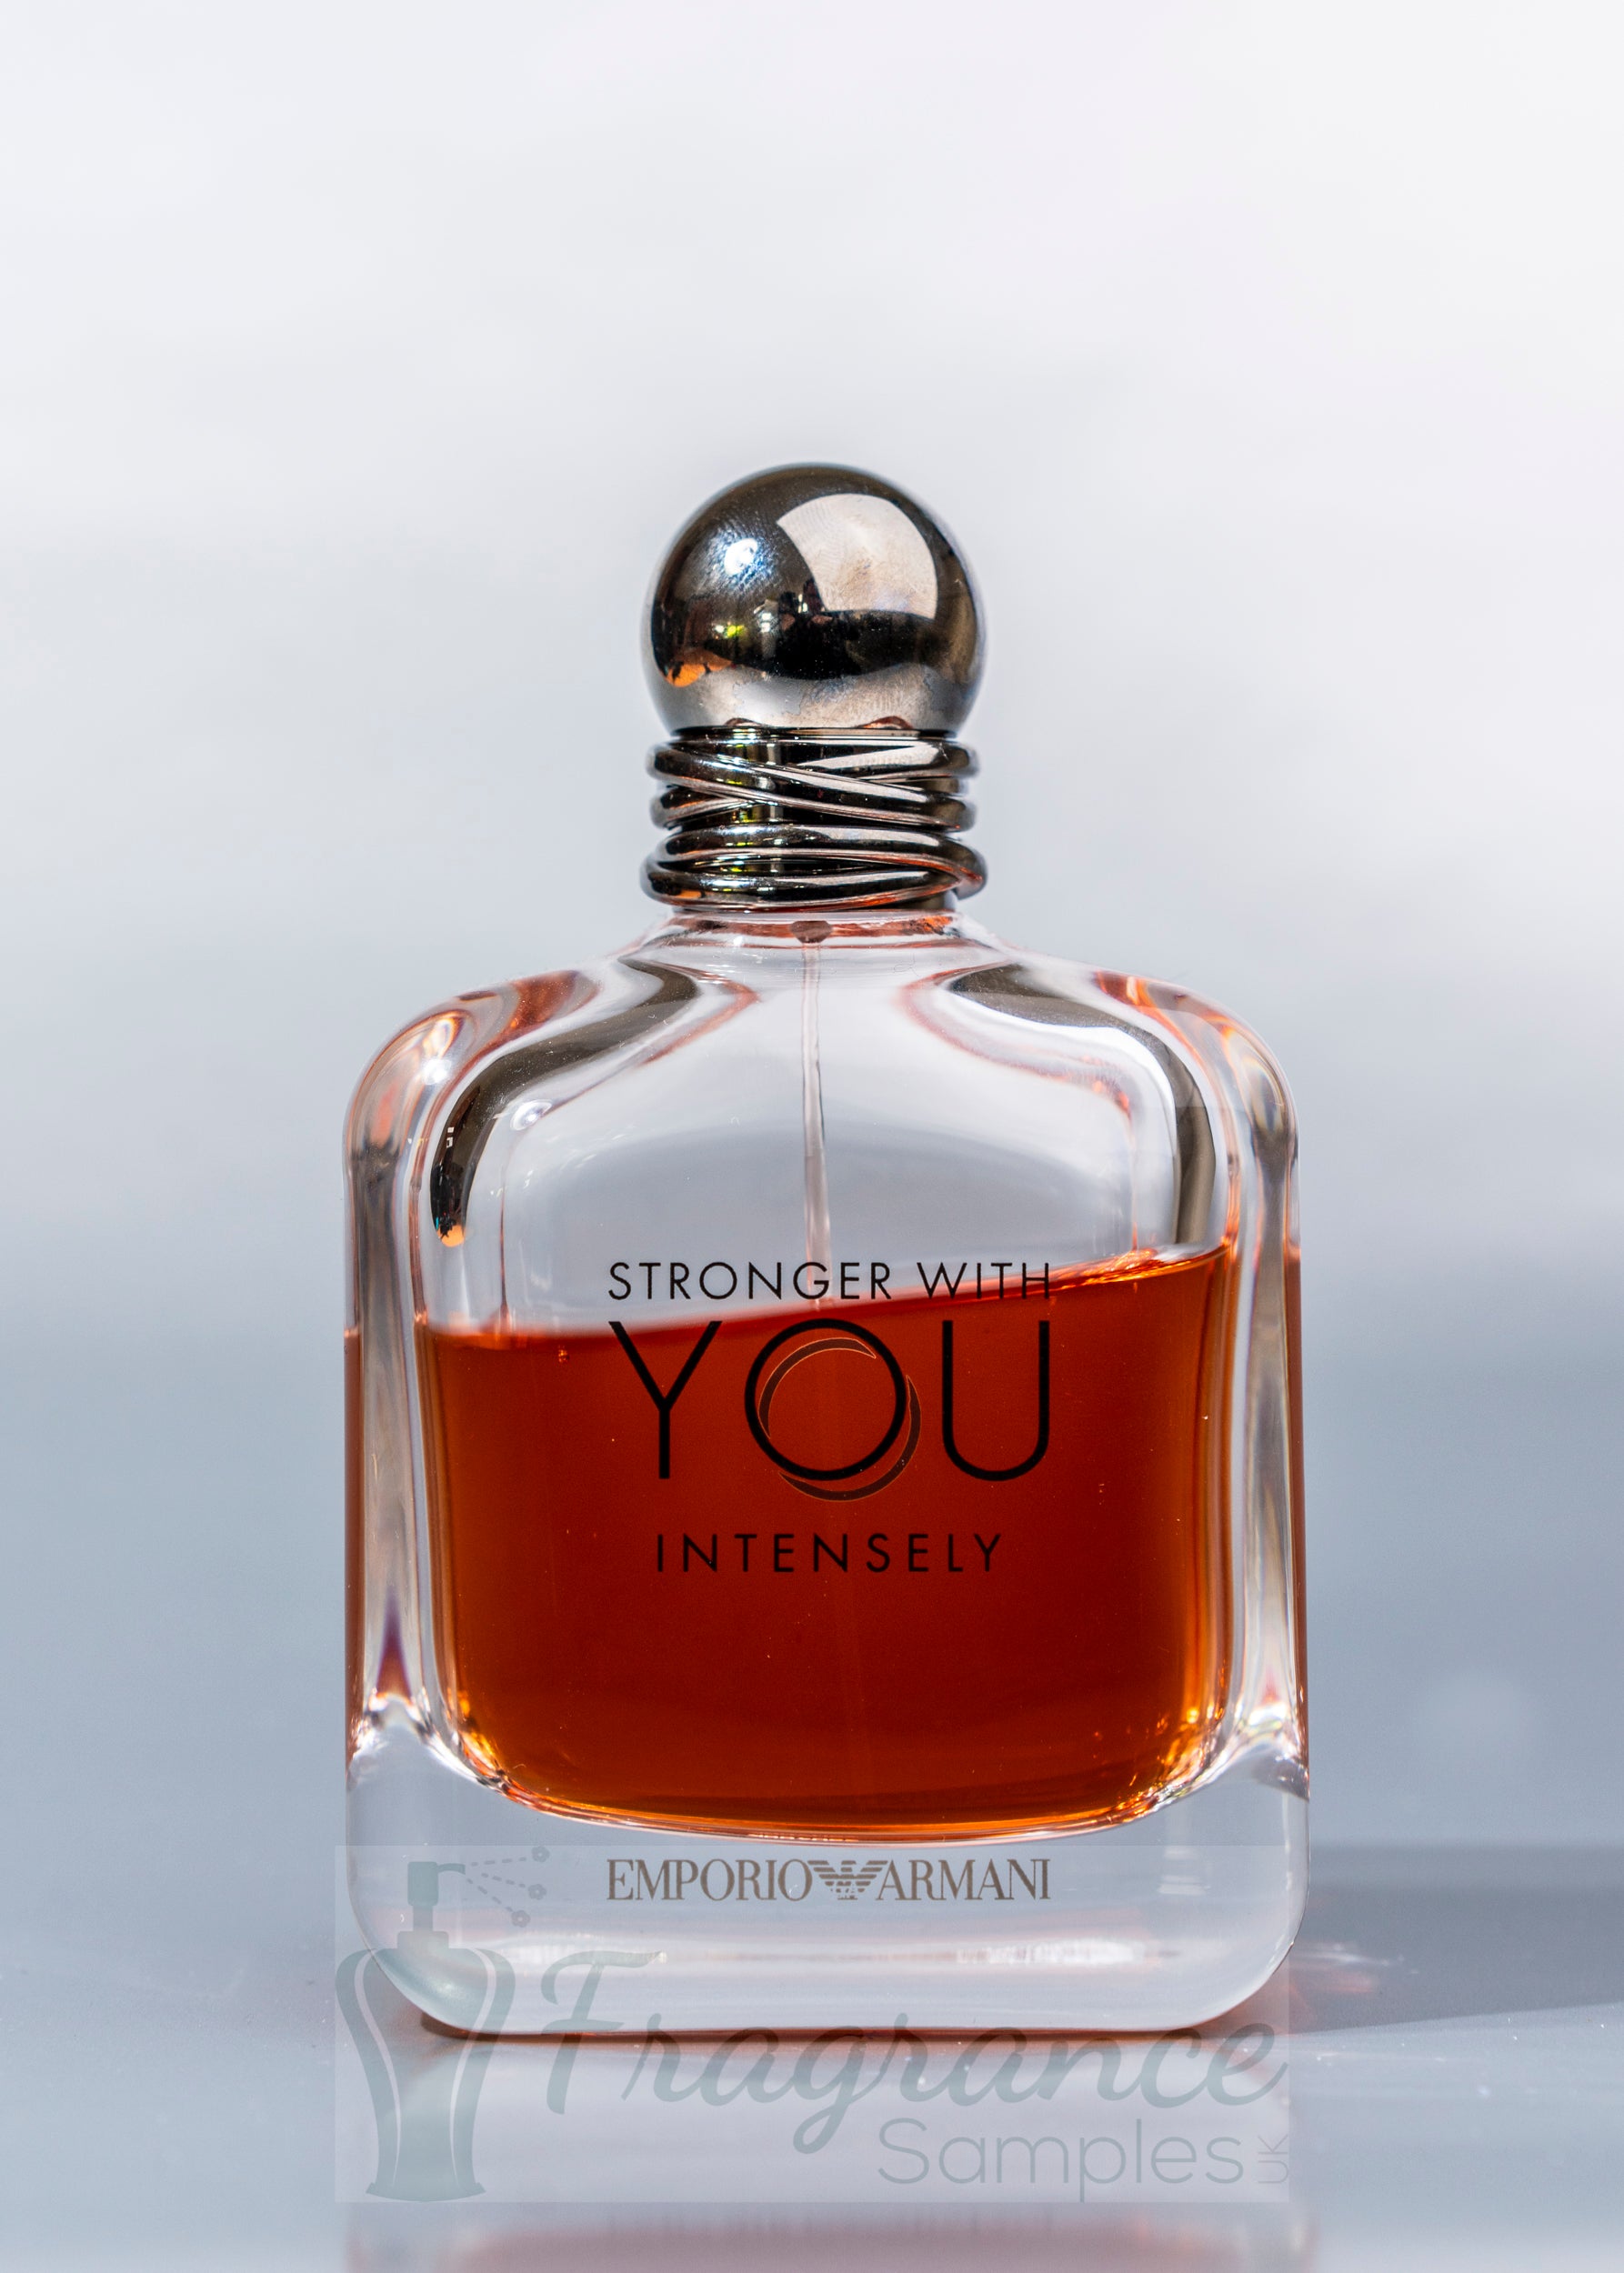 Emporio Armani Stronger with You Intensely – Fragrance Samples UK